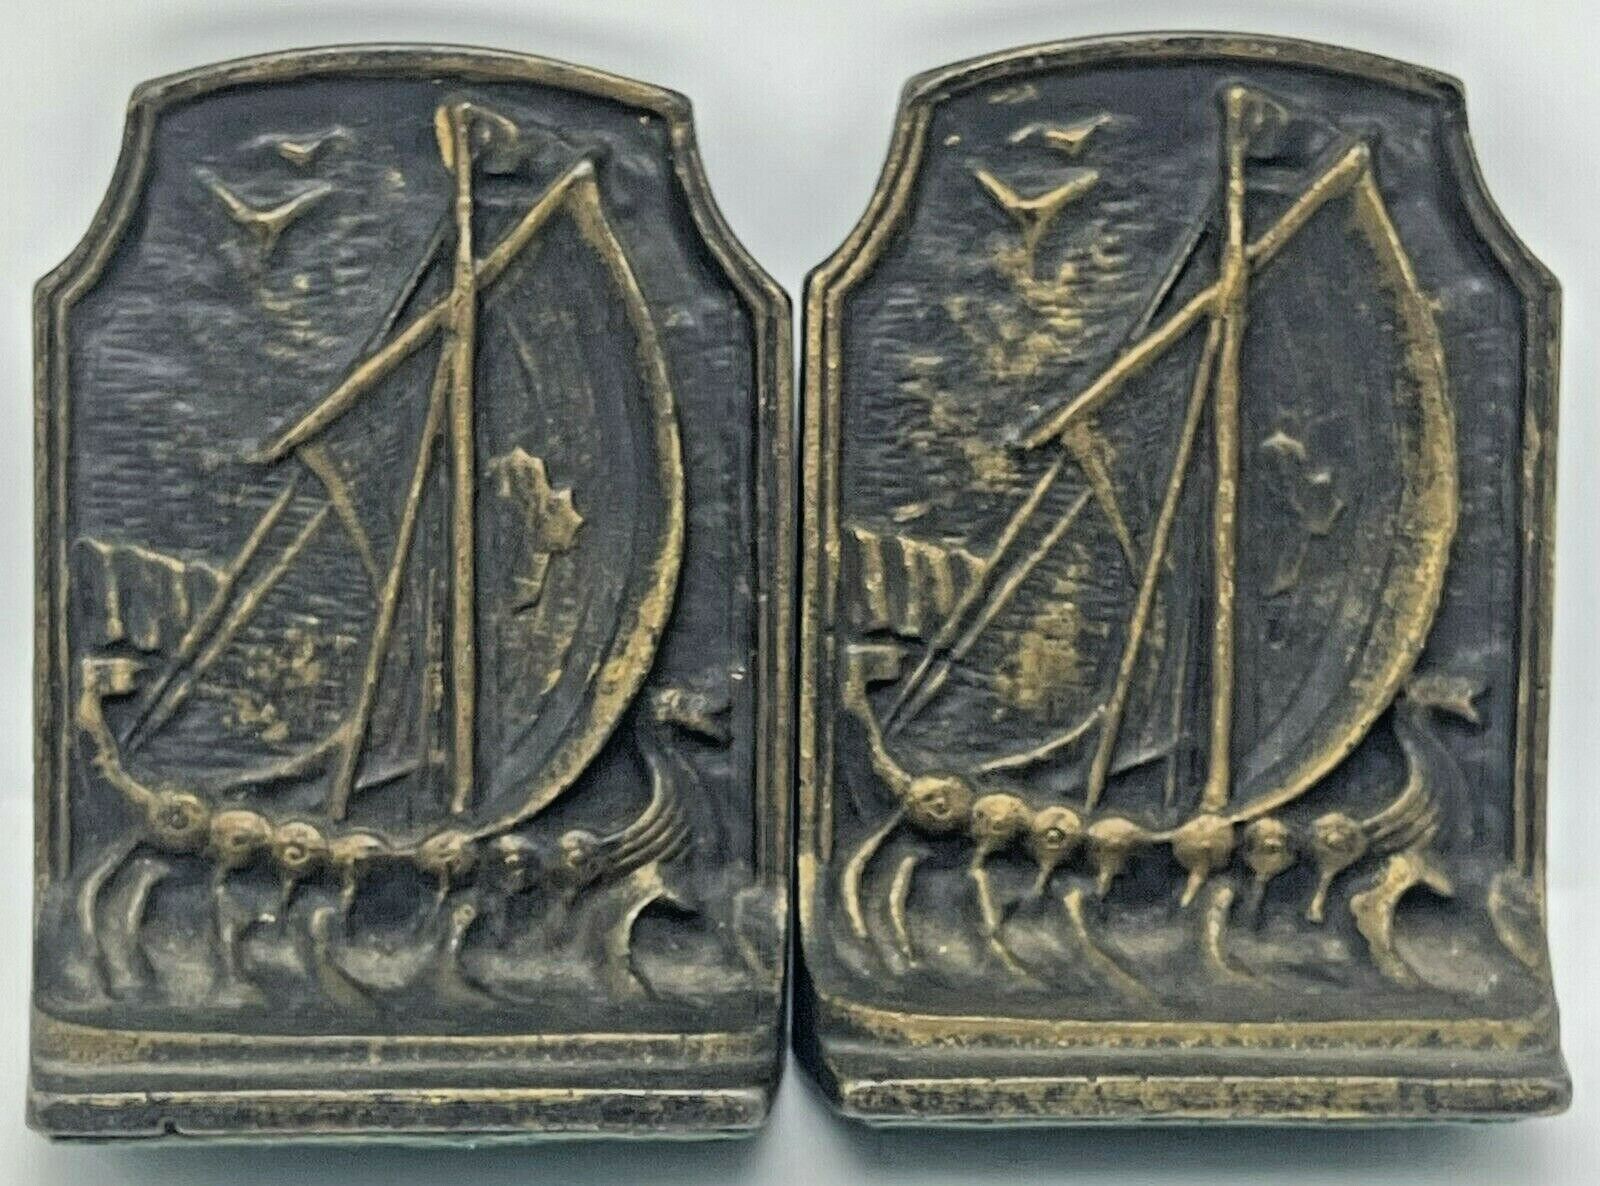 Vintage Pair Viking Sailing Ship Boat Heavy Cast Metal Bookends